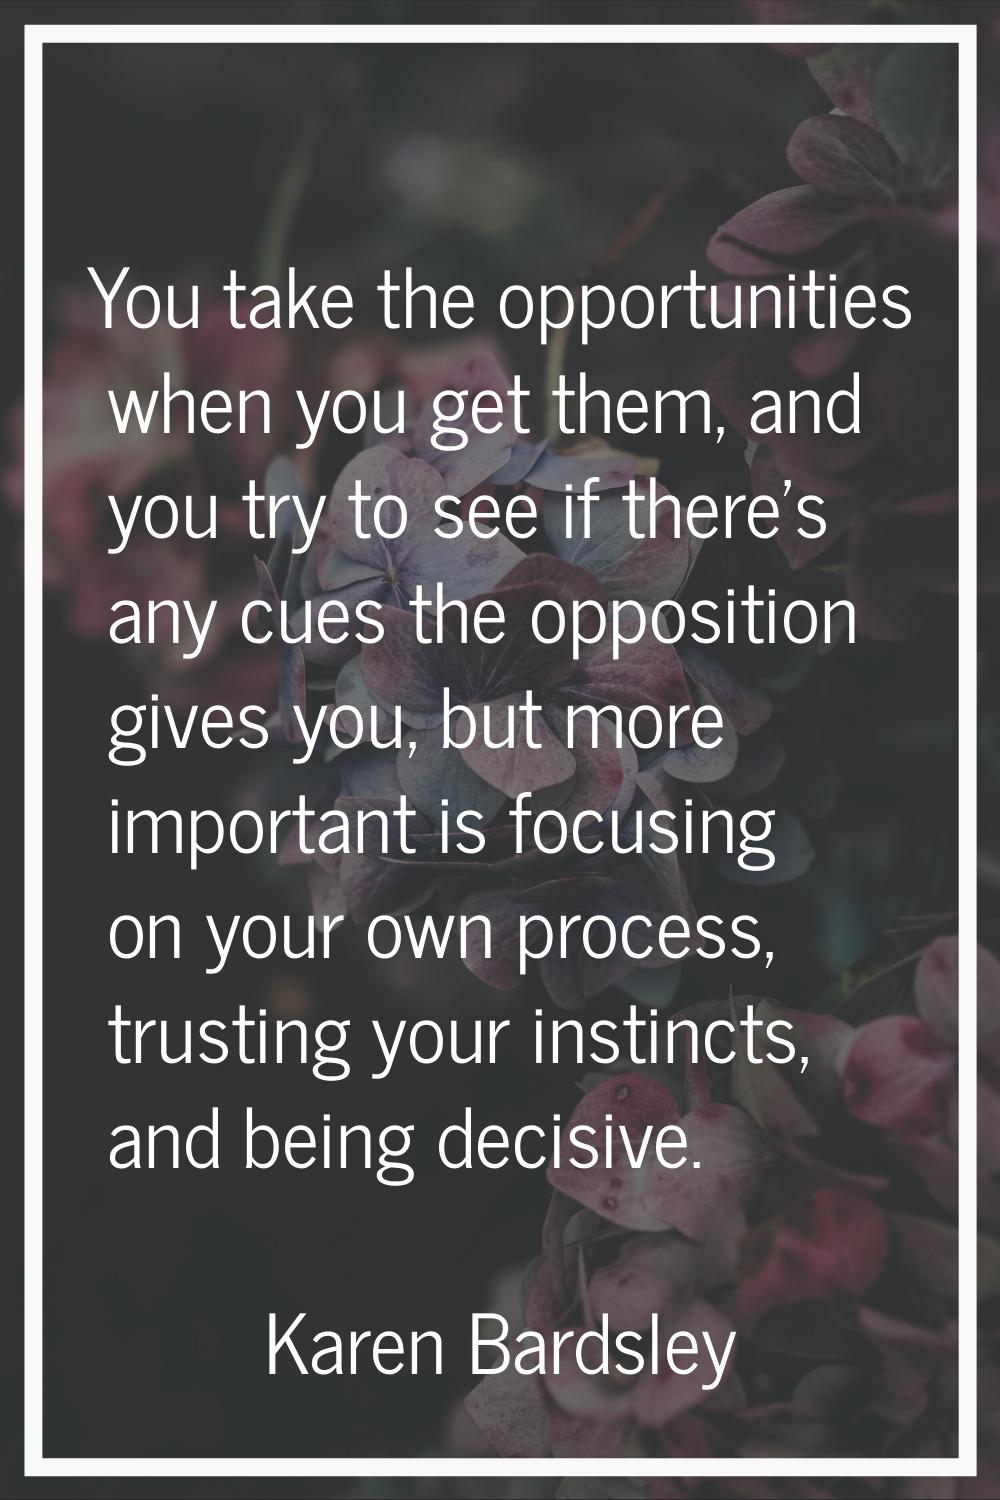 You take the opportunities when you get them, and you try to see if there's any cues the opposition